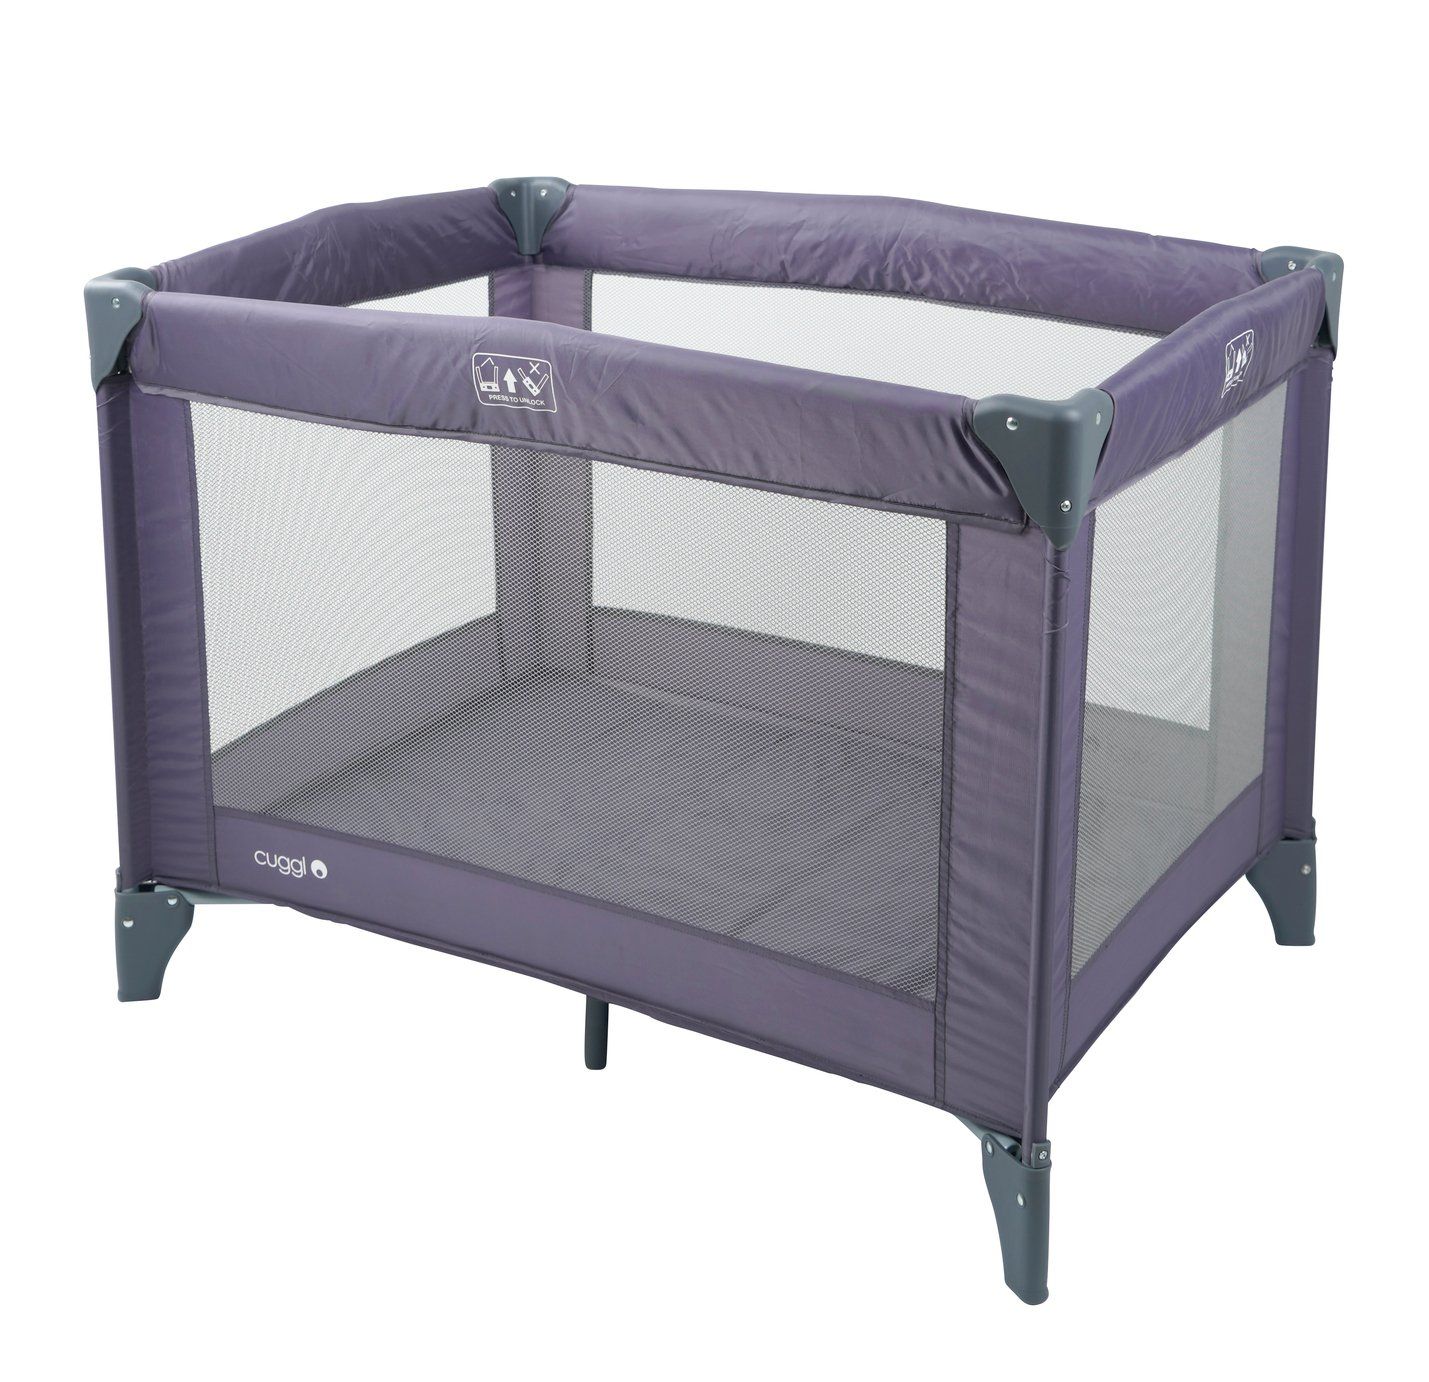 <p><strong>£29.99</strong></p><p><a href="https://www.argos.co.uk/product/7065165">Shop Now</a></p><p>I bought this to take my three month old baby camping last summer and we've used it religiously ever since. At 9kg it's slightly bulky, but if you're flinging it in the back of the car for a weekend away it does the trick. Admittedly the sleeping base is a bit hard so we have since added this <a href="https://www.amazon.co.uk/Mother-Nurture-120x60cm-Fibre-Mattress/dp/B00CBAWDXY">cot mattress</a>, but if you're looking for a sturdy and cost-effective portable crib, I can't recommend this enough.</p><p><strong>Dimensions</strong>: 74cm x 100cm x 74cm</p><p><strong>Folded size</strong>: 75cm x 21cm x 21cm</p><p><strong>Weight</strong>: 9kg</p>